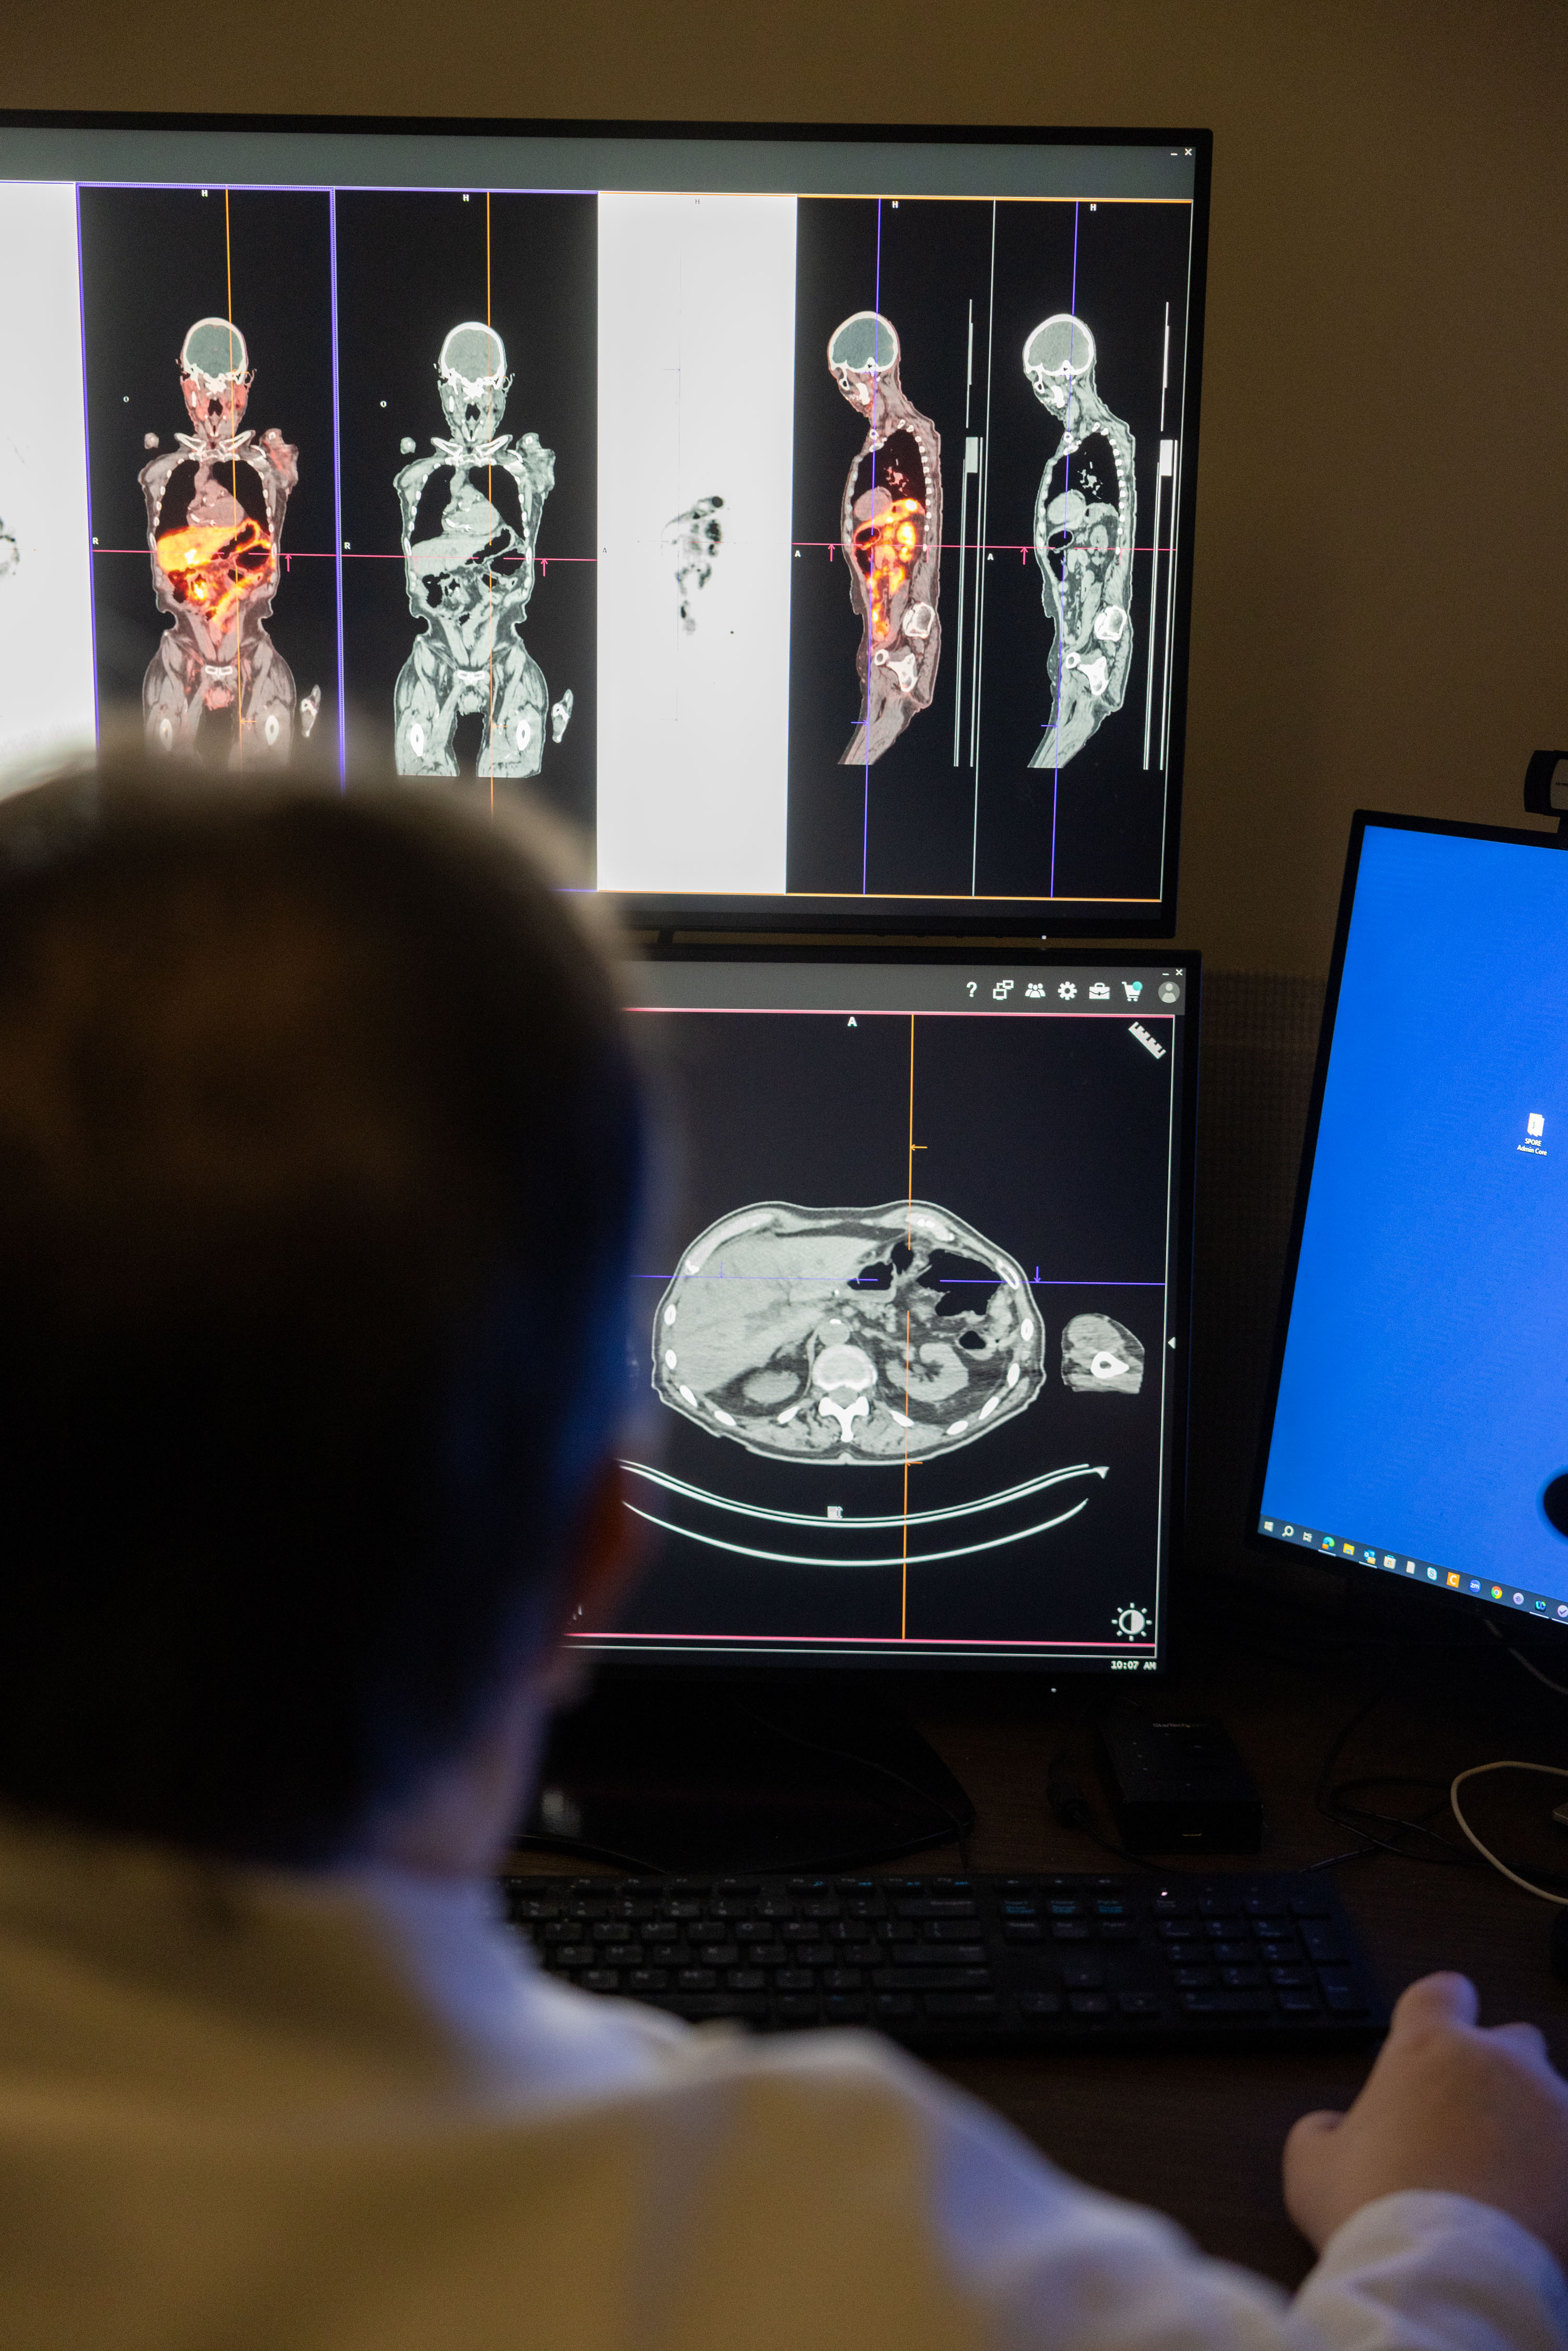 Theranostics uses quantitative imaging expertise to identify specific receptors on cancerous cells. This allows physicians to target only cancer cells and calculate the appropriate radiation dose for each patient.